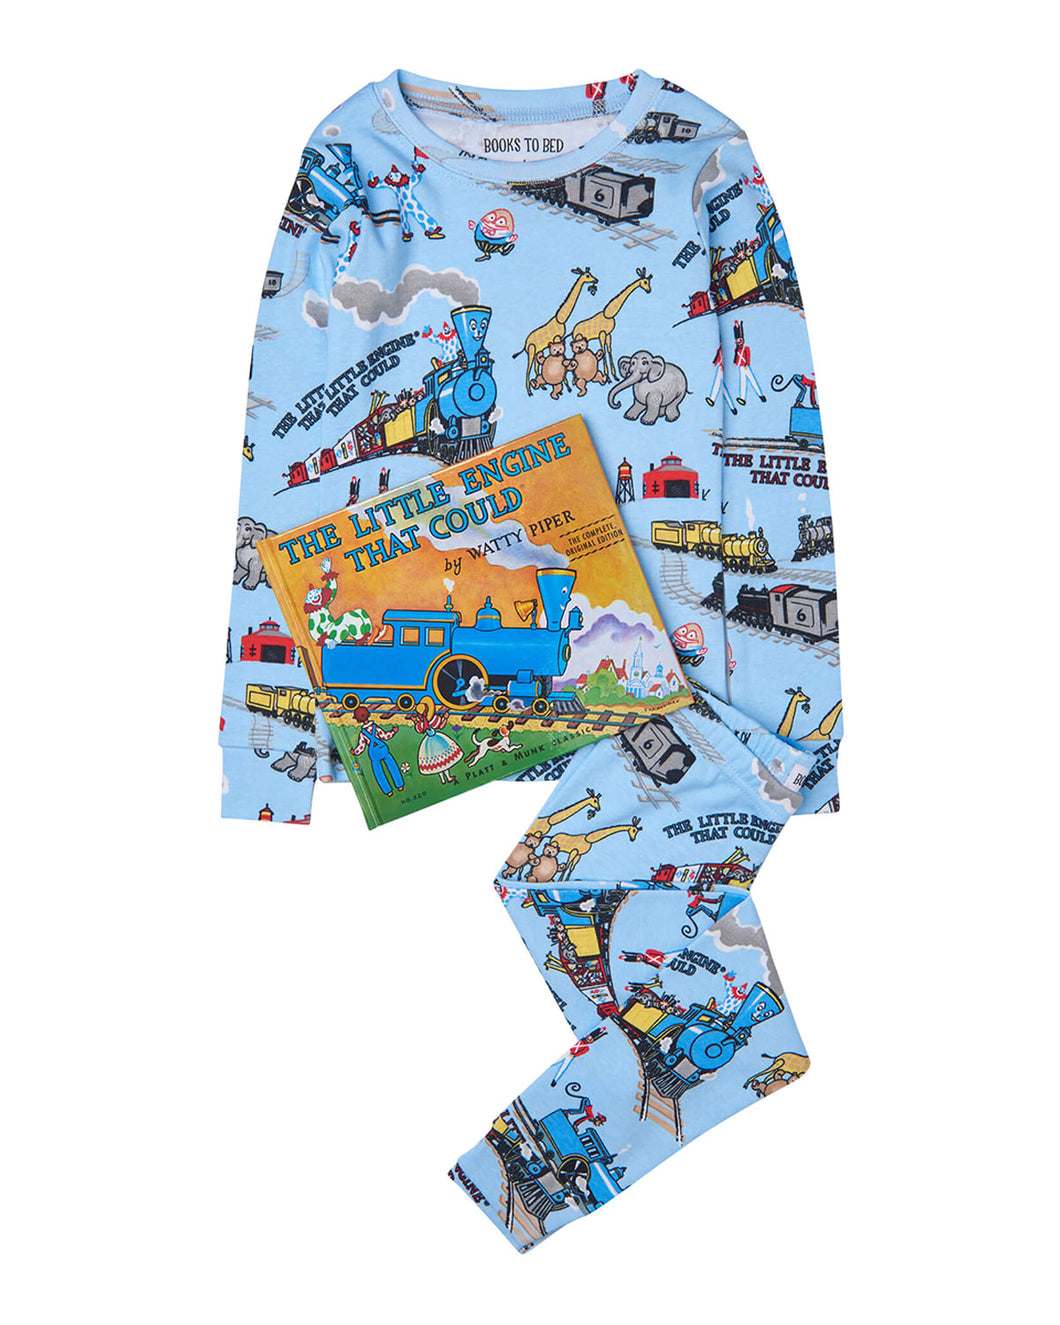 The Little Engine That Could Book + Pajama Set